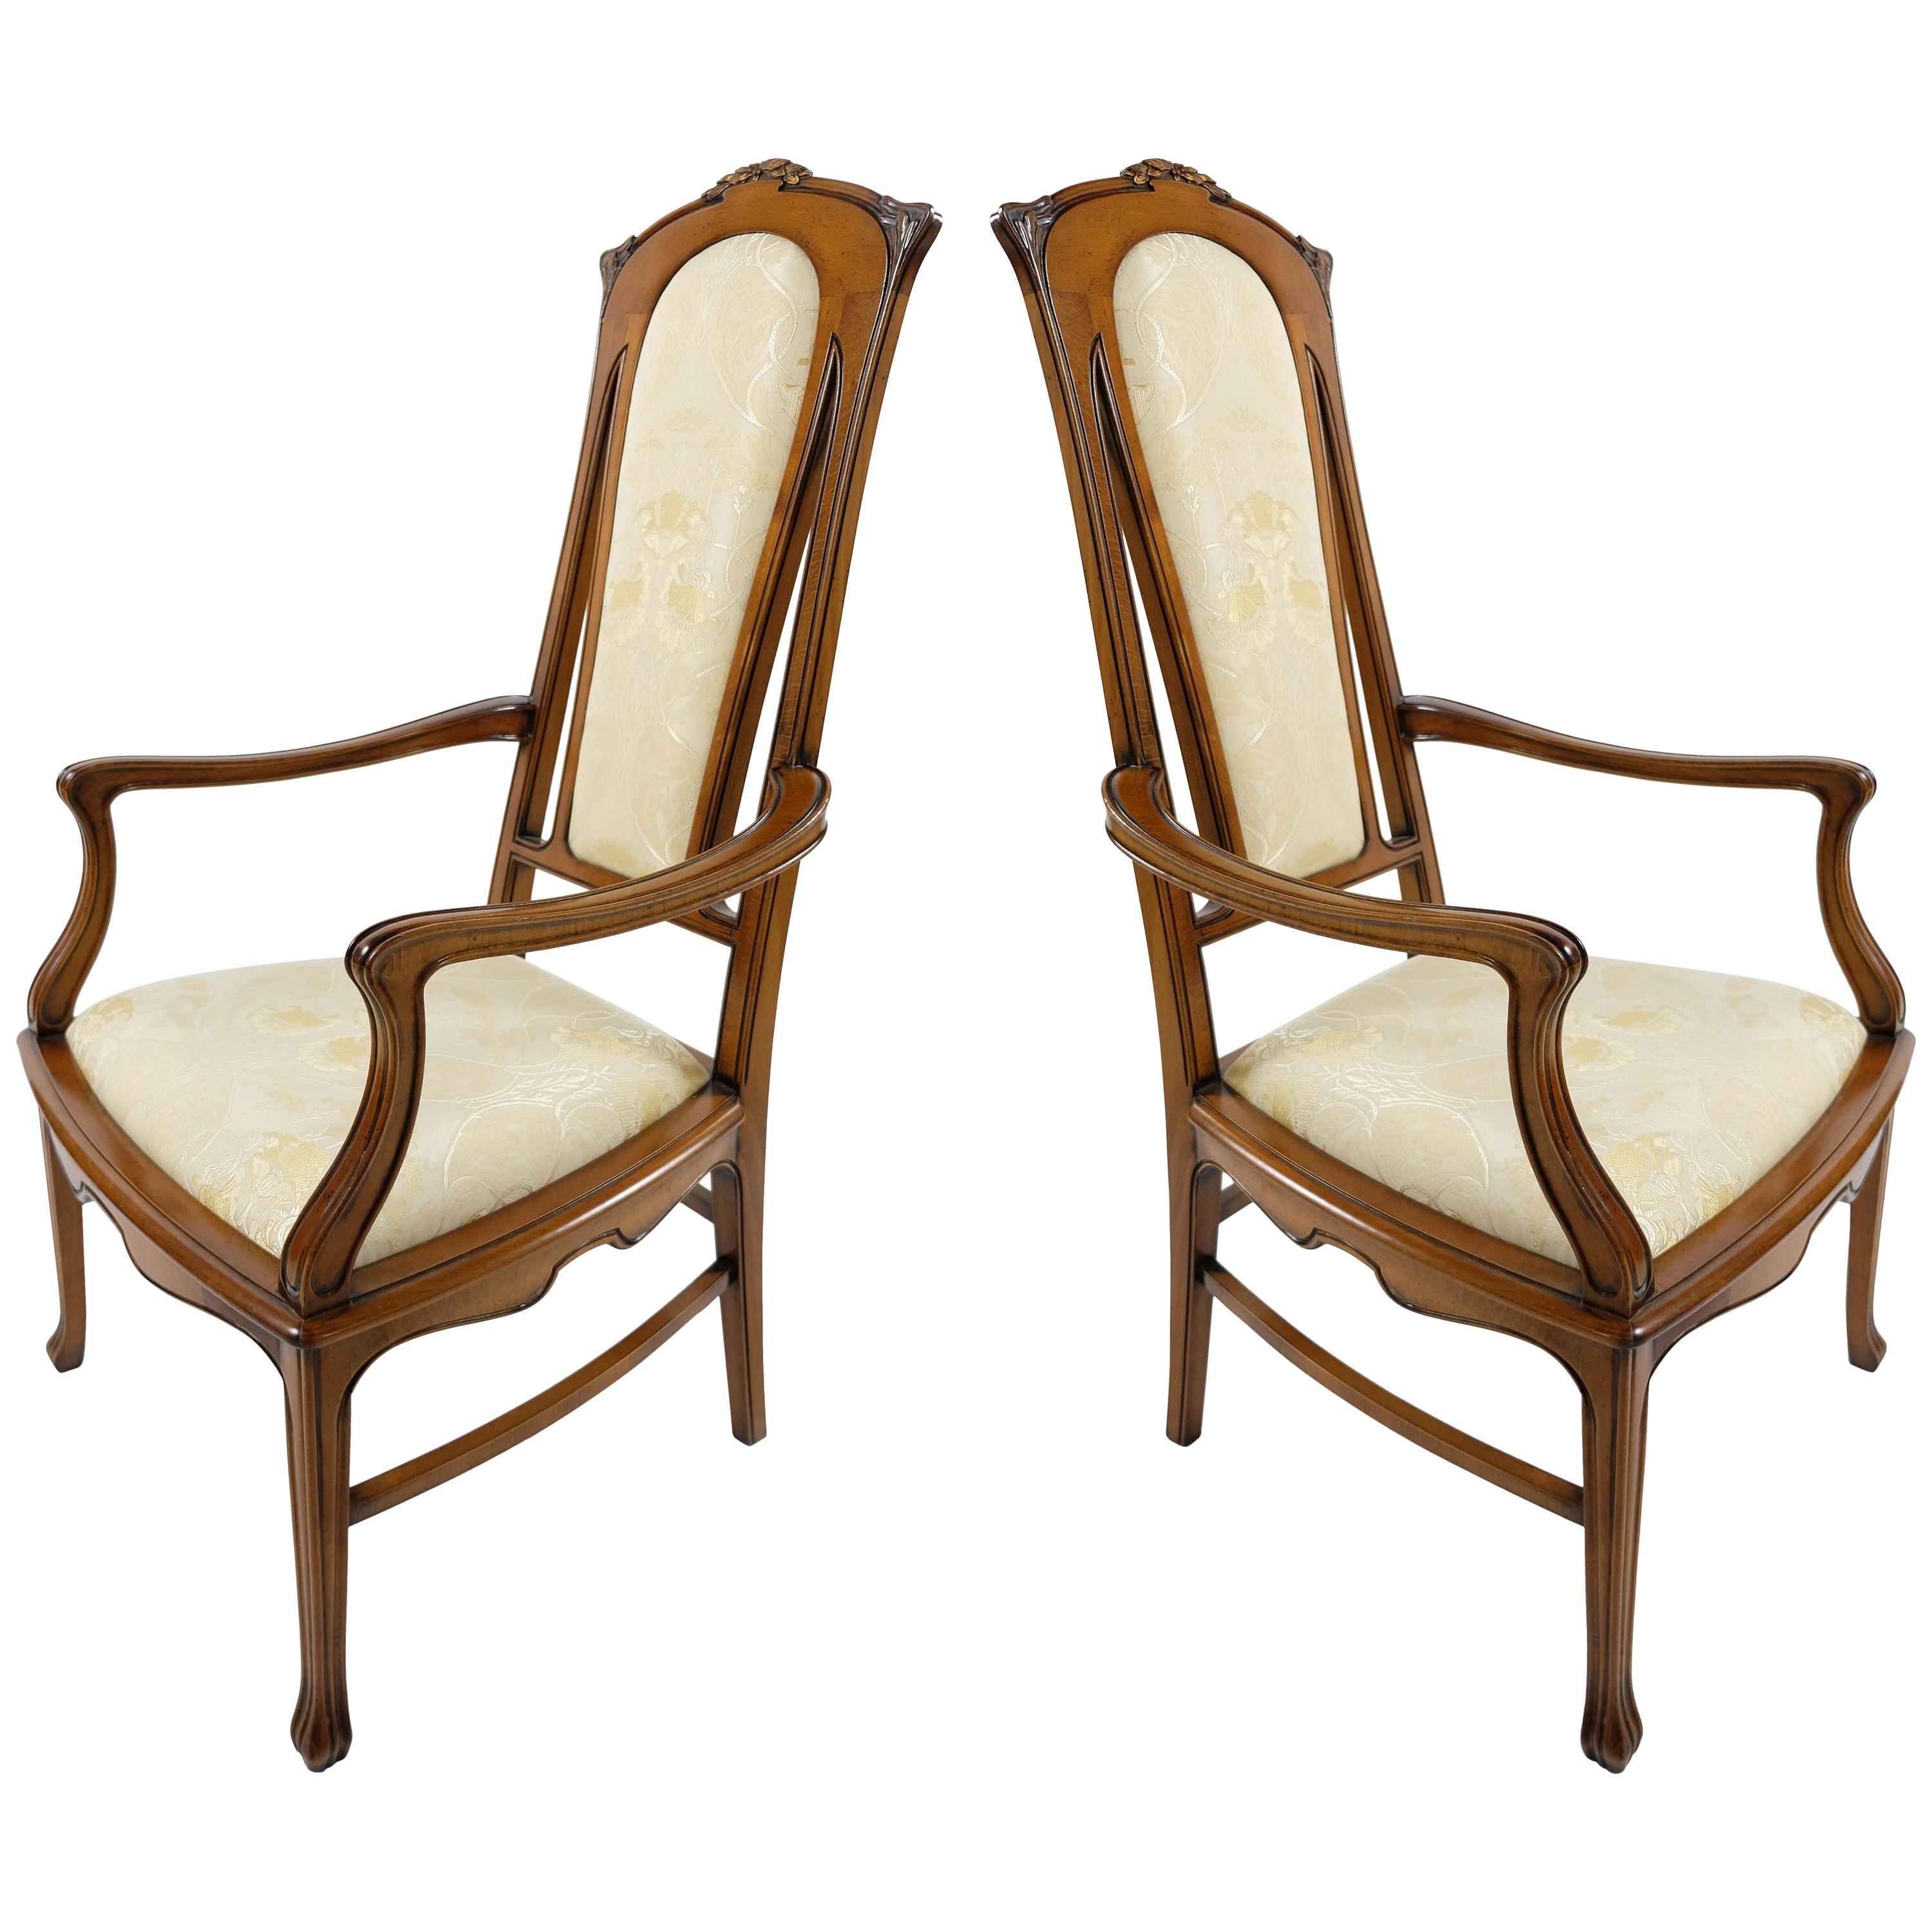  Medea Hand-Carved Art Nouveau Style Armchairs, Pair For Sale